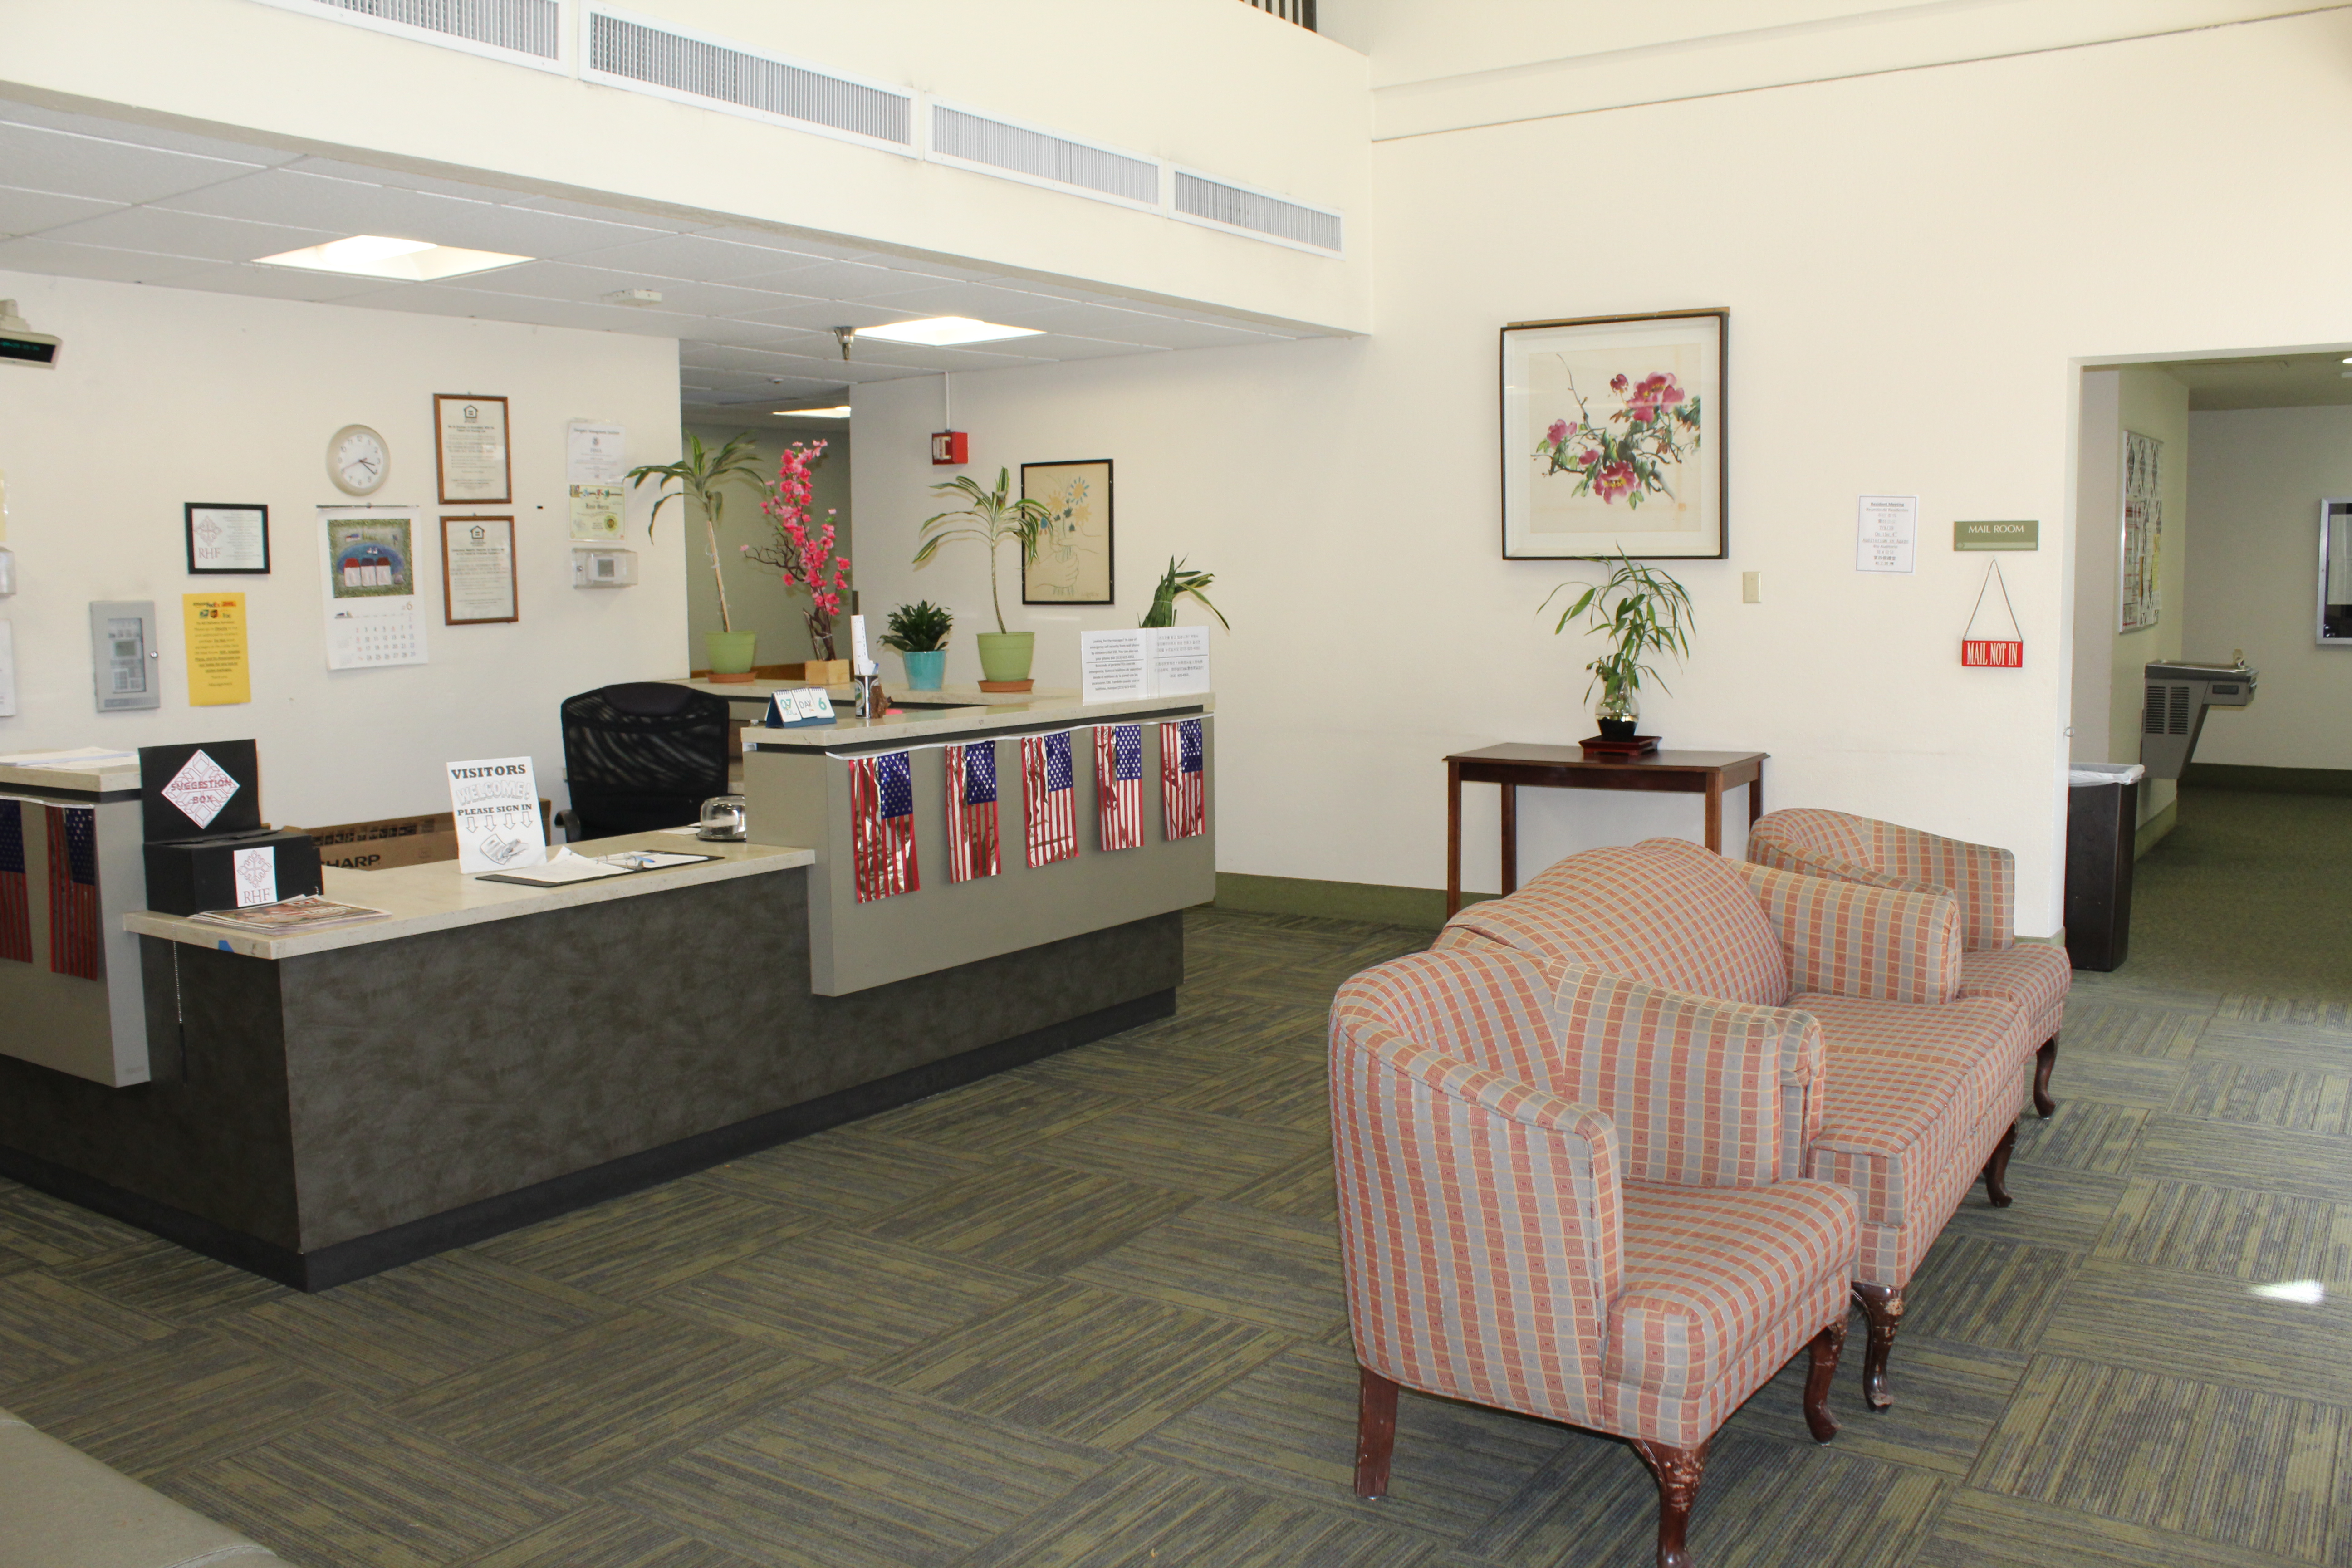 Interior view of a lobby area of Angelus Plaza 1. Potted plants around the front desk with American flag garland, 5 flags in all. Two sofa chairs with a love seat inbetween